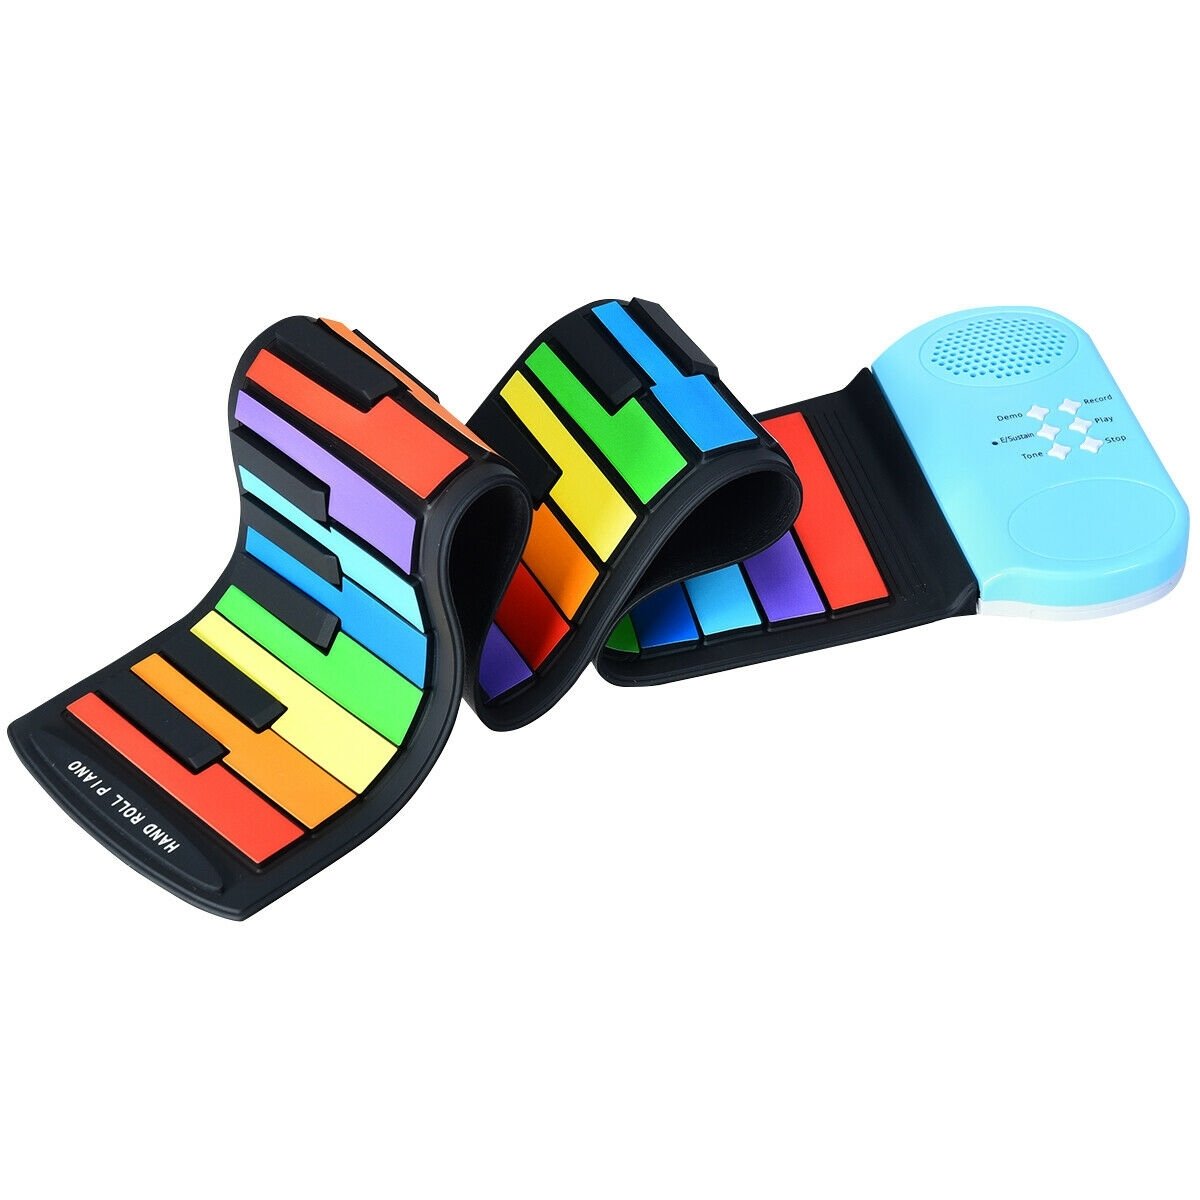 49-Key Roll-up Piano with Support Earphones, Multicolor